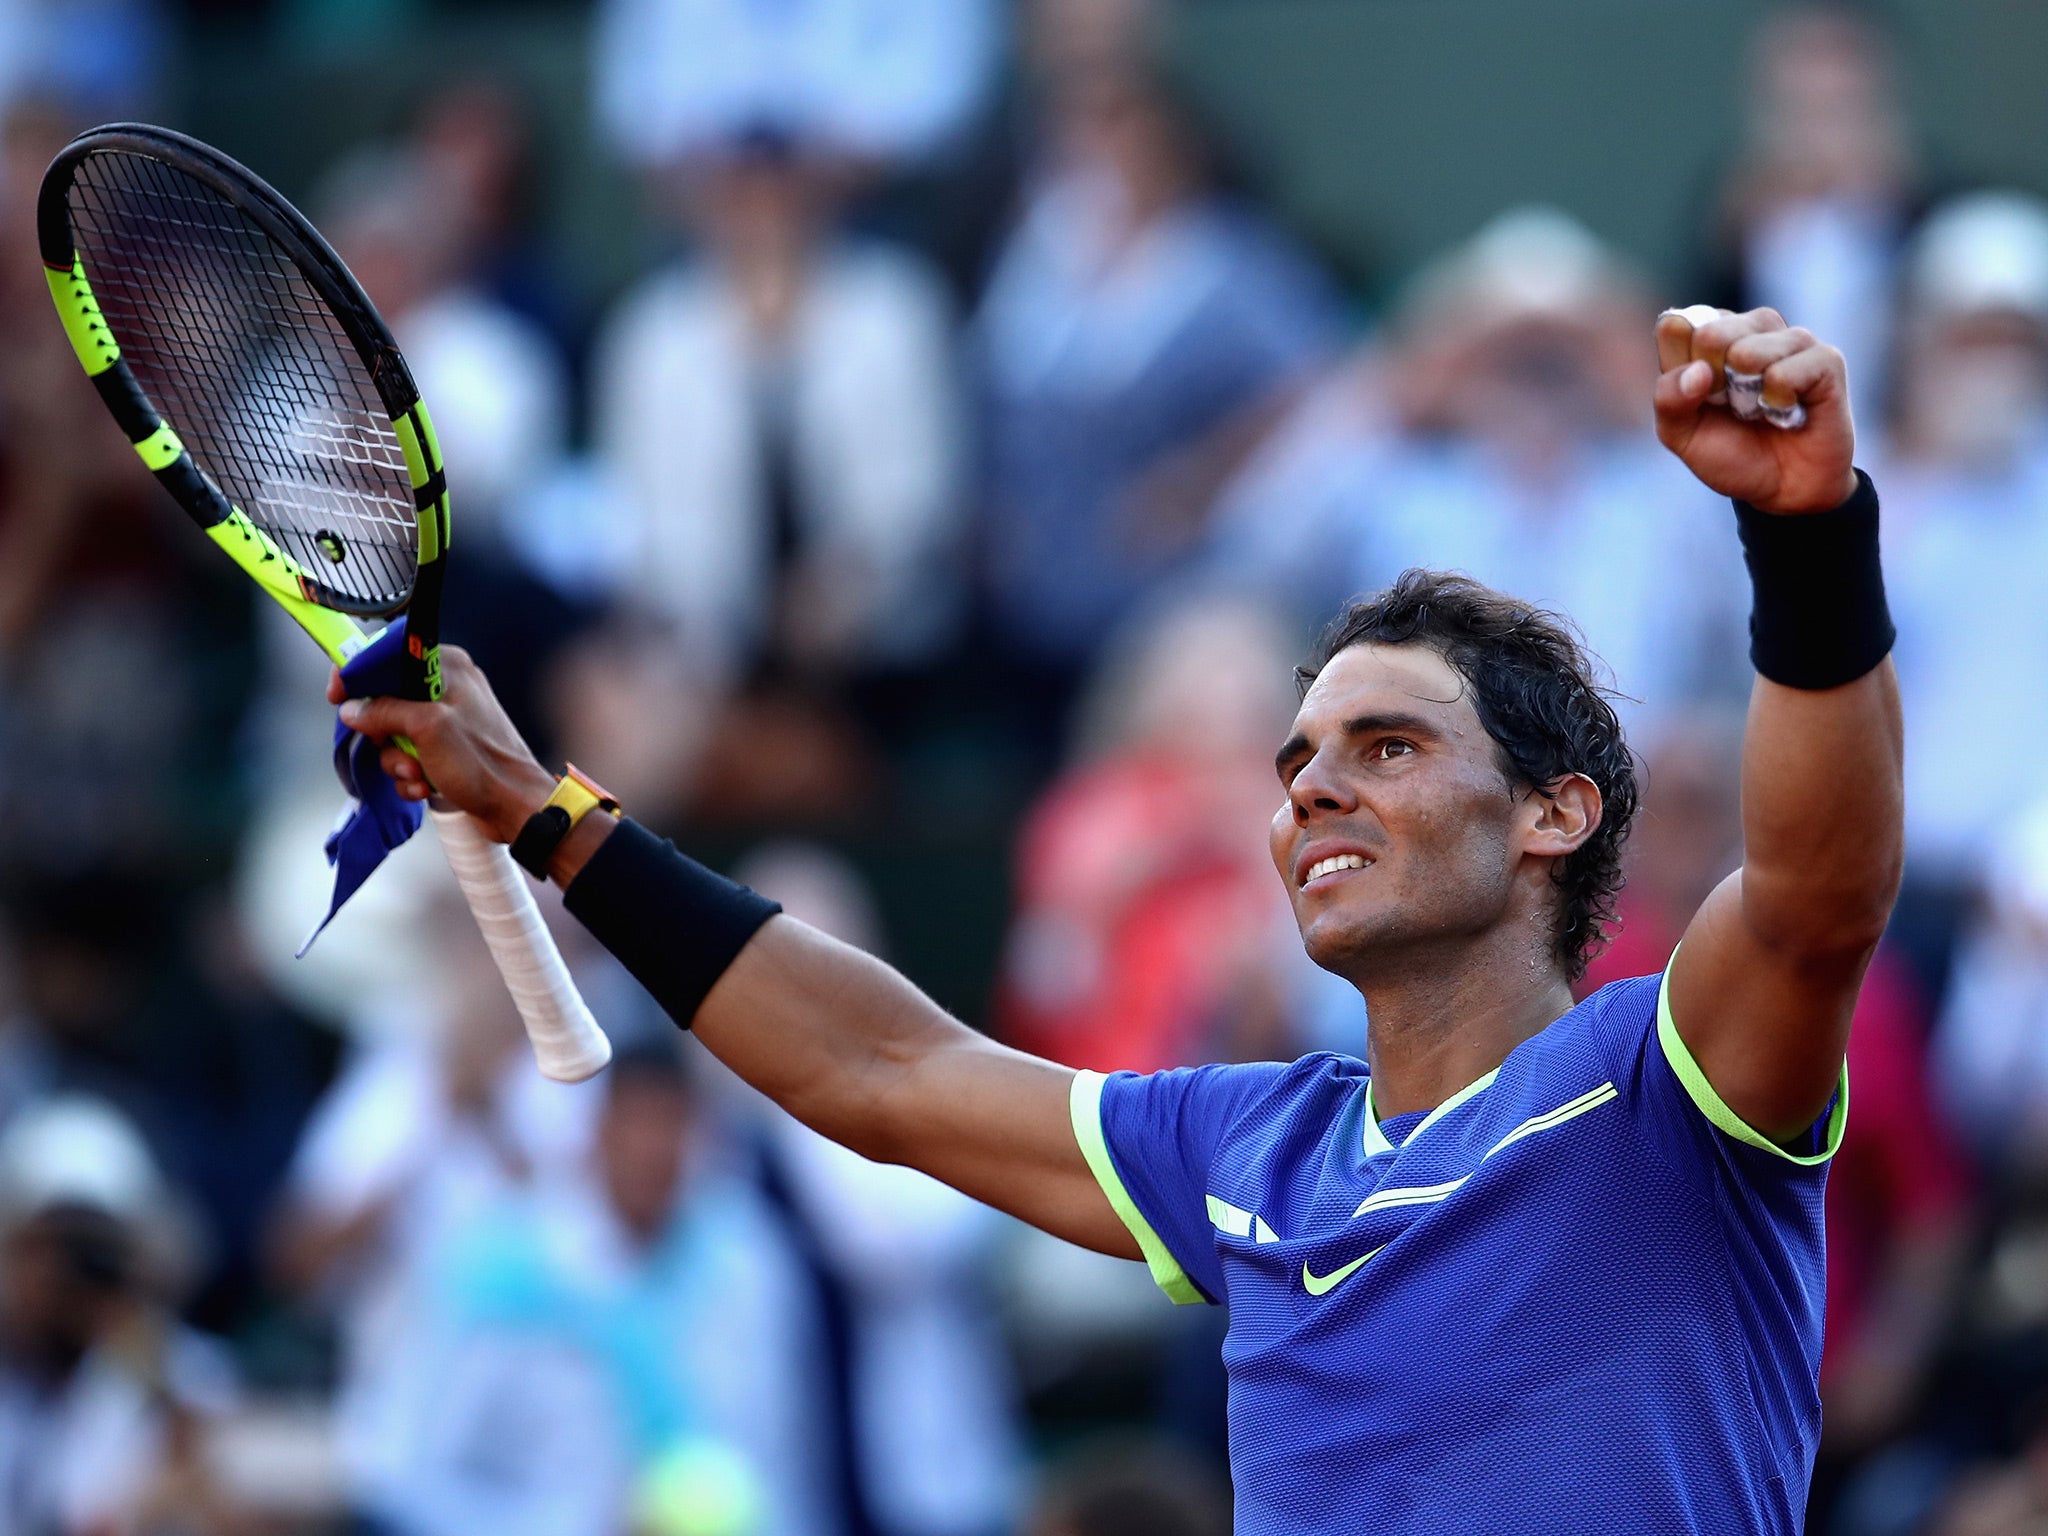 Rafael Nadal is in supreme form, having only dropped only 29 games so far